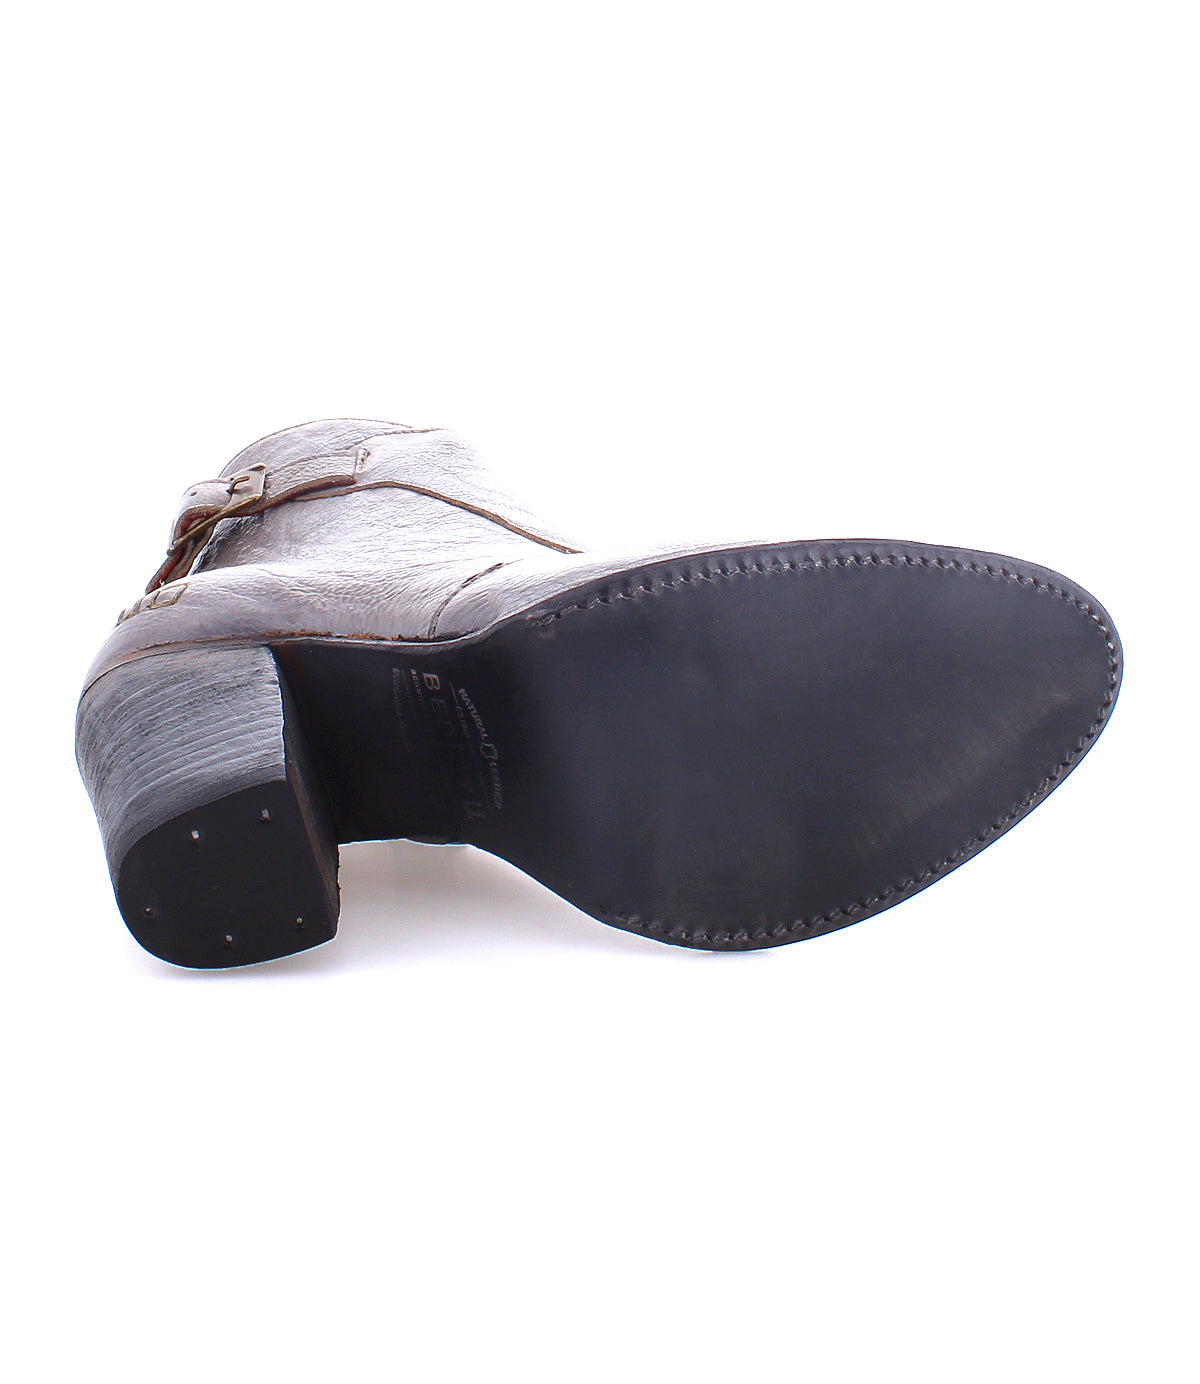 Isla brown leather dress shoe with a vintage buckle accent, viewed from its left side, against a white background by Bed Stu.